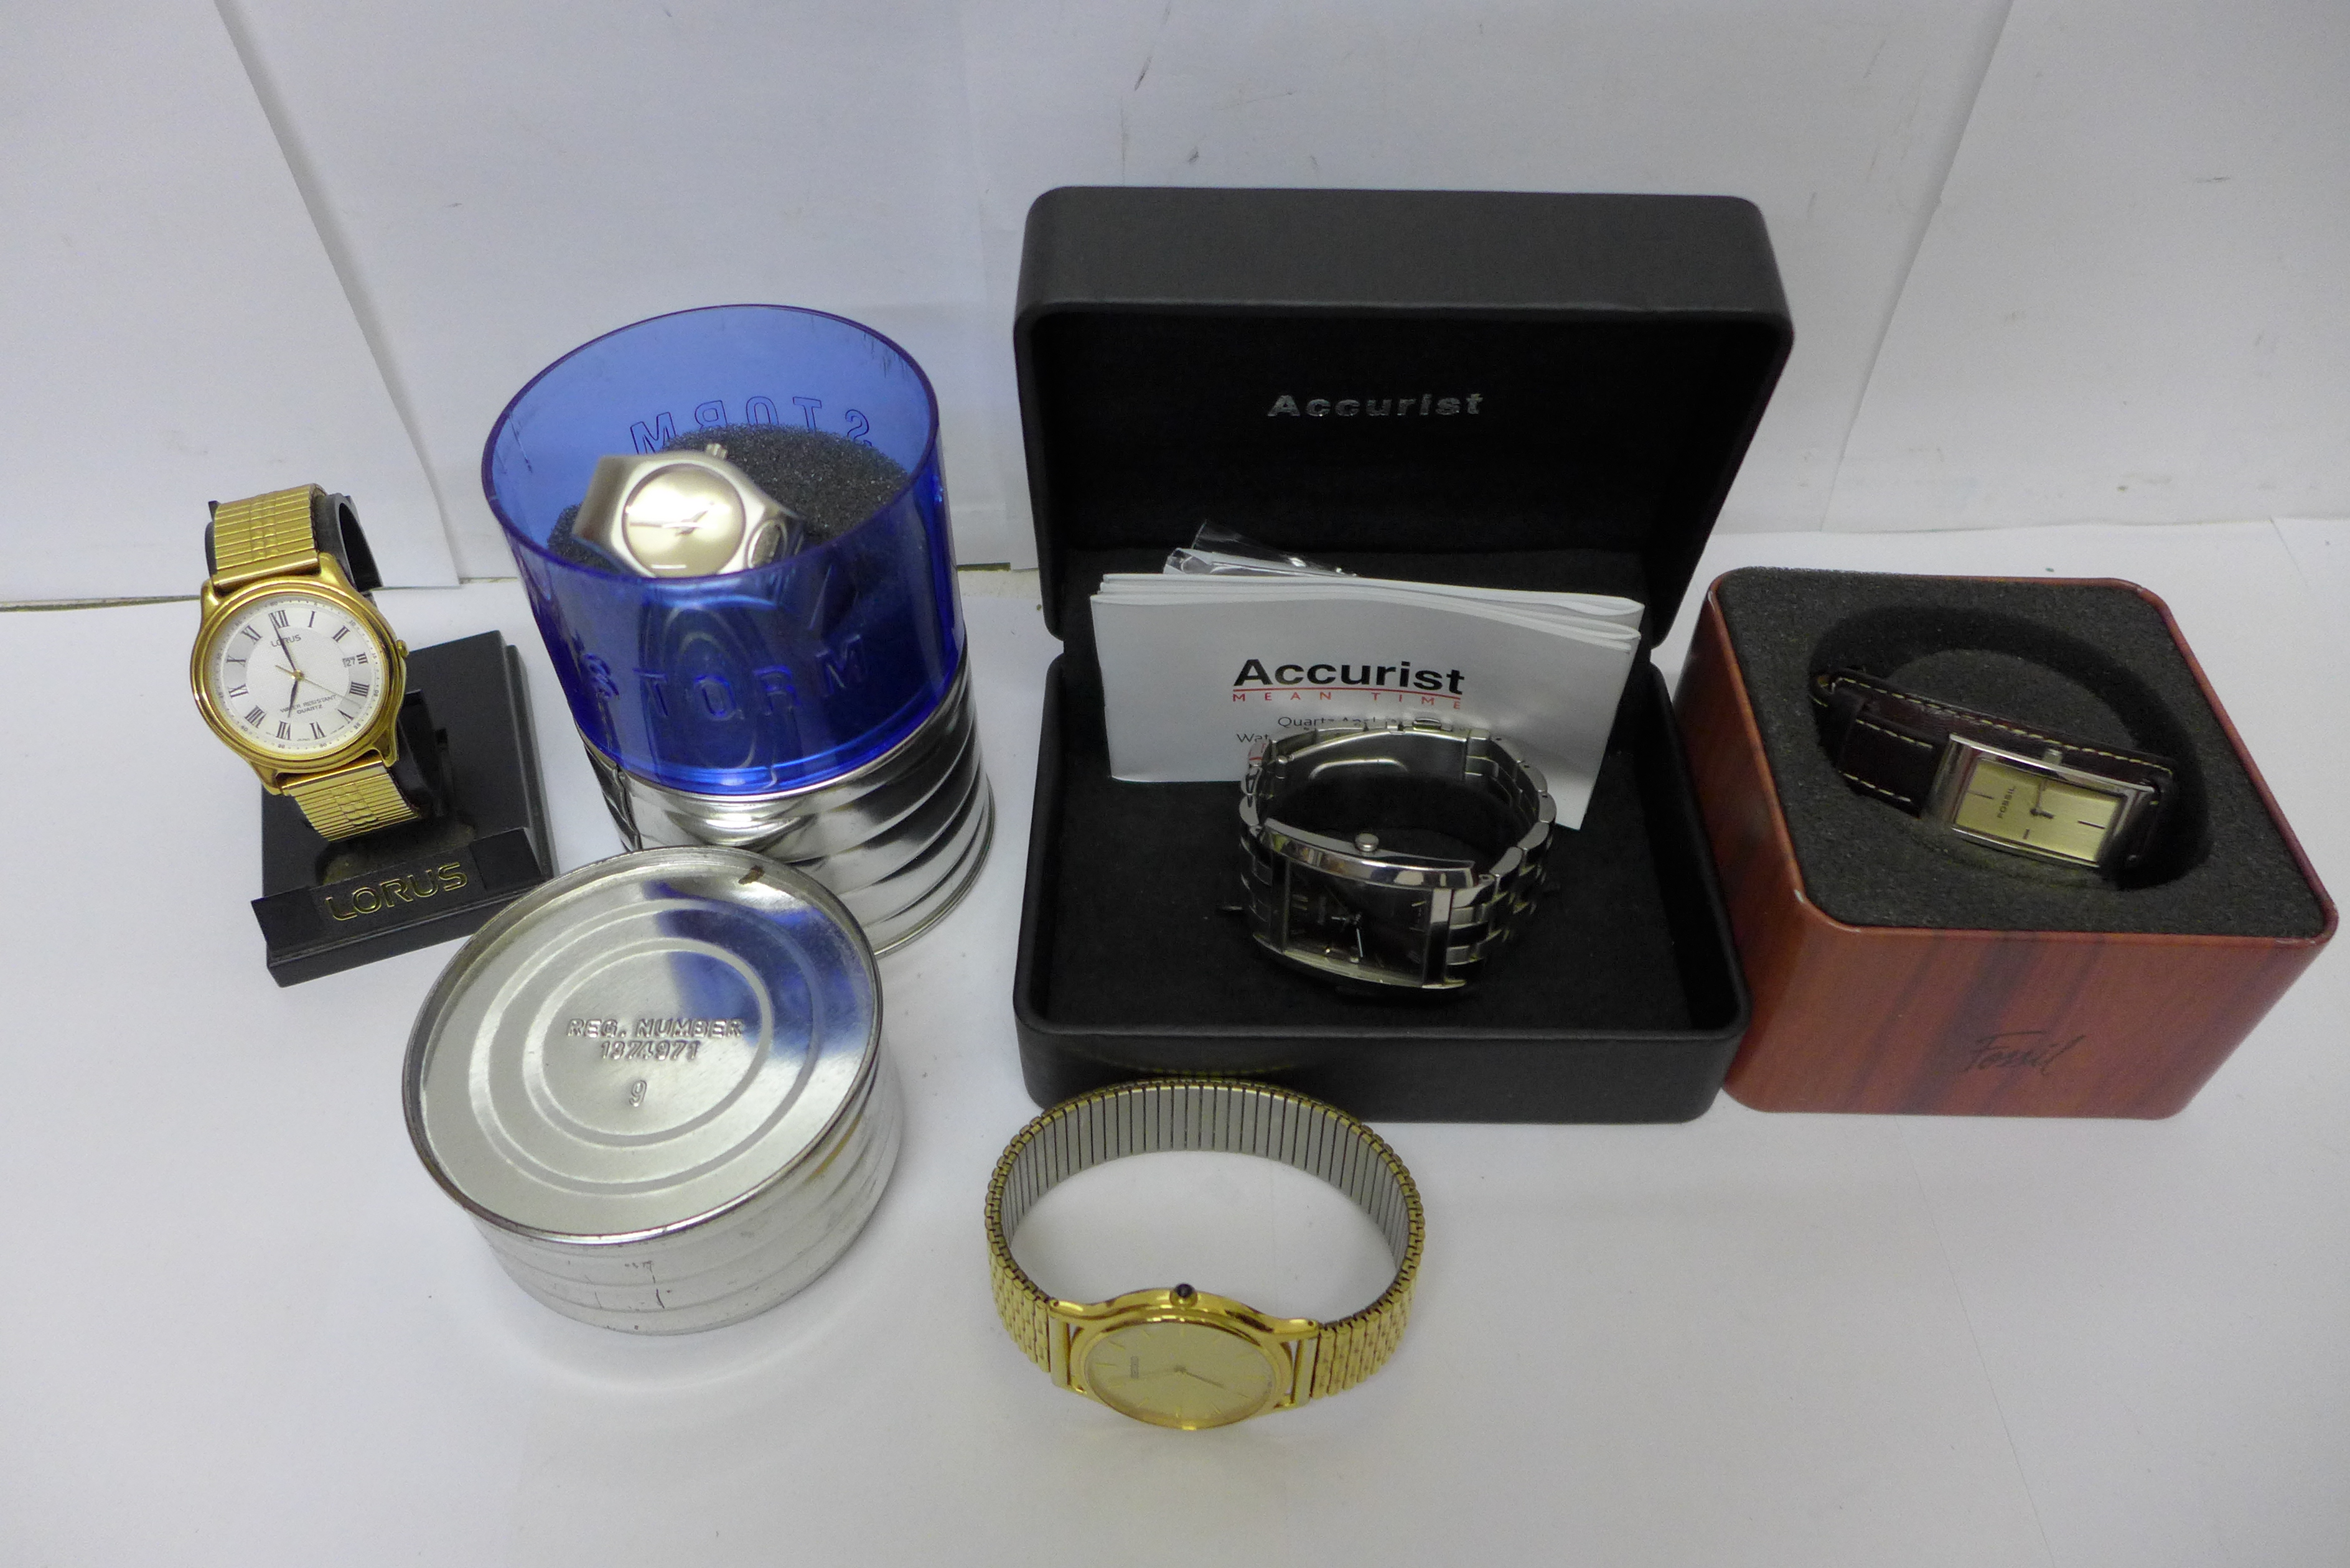 Wristwatches including Seiko, Accurist, Fossil and Storm